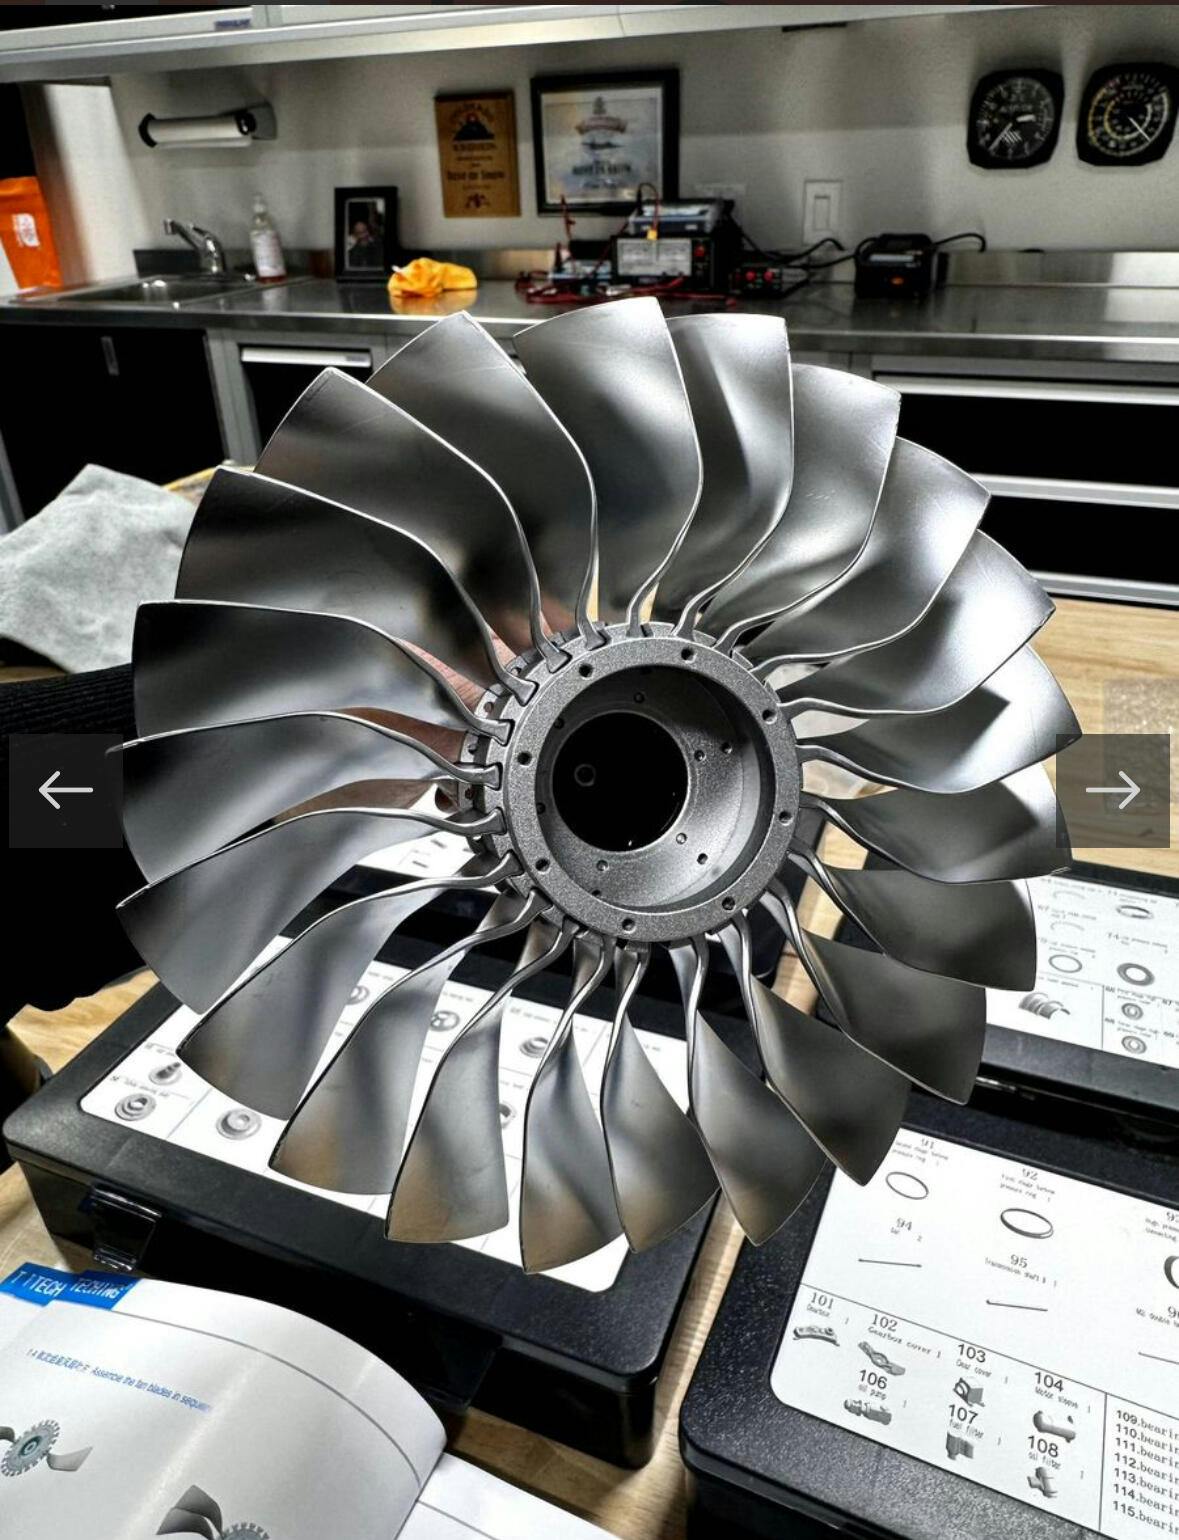 TECHING DIY Turbofan Jet Engine Model Kit - 1/10 Scale Full Metal Dual-Spool Aircraft Engine Assembly Model with Over 1000 Parts photo review